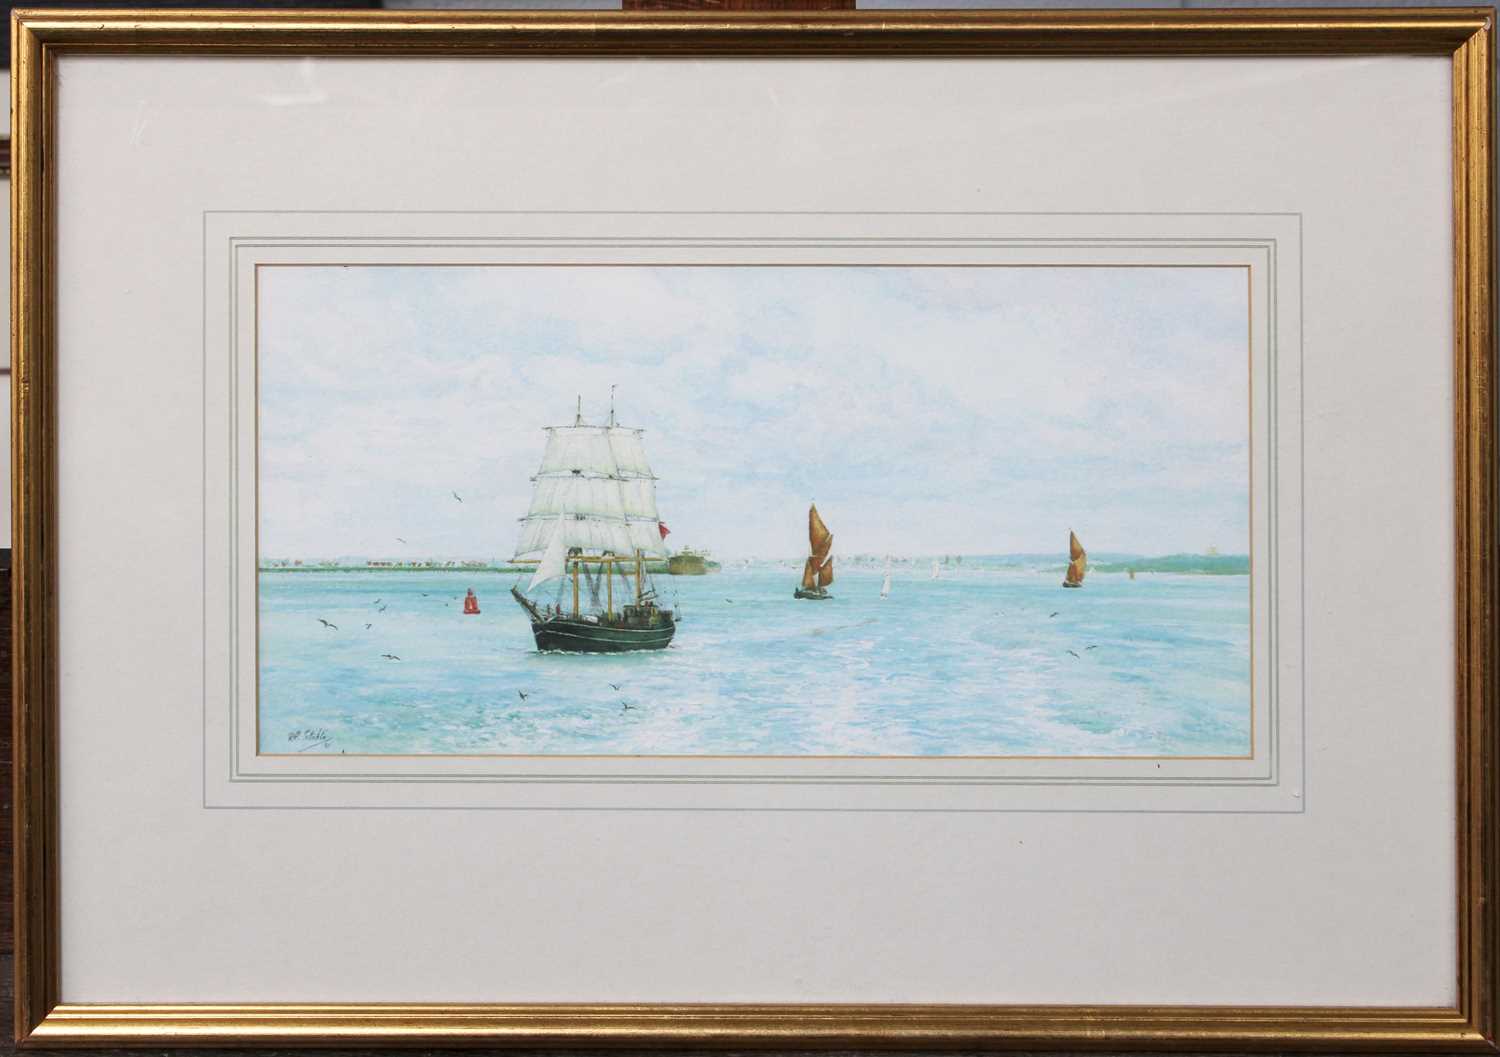 Robert Paul Stokle (20th Century) "Kaskelot leaving Southampton water" Signed and dated (19)95, - Image 3 of 4